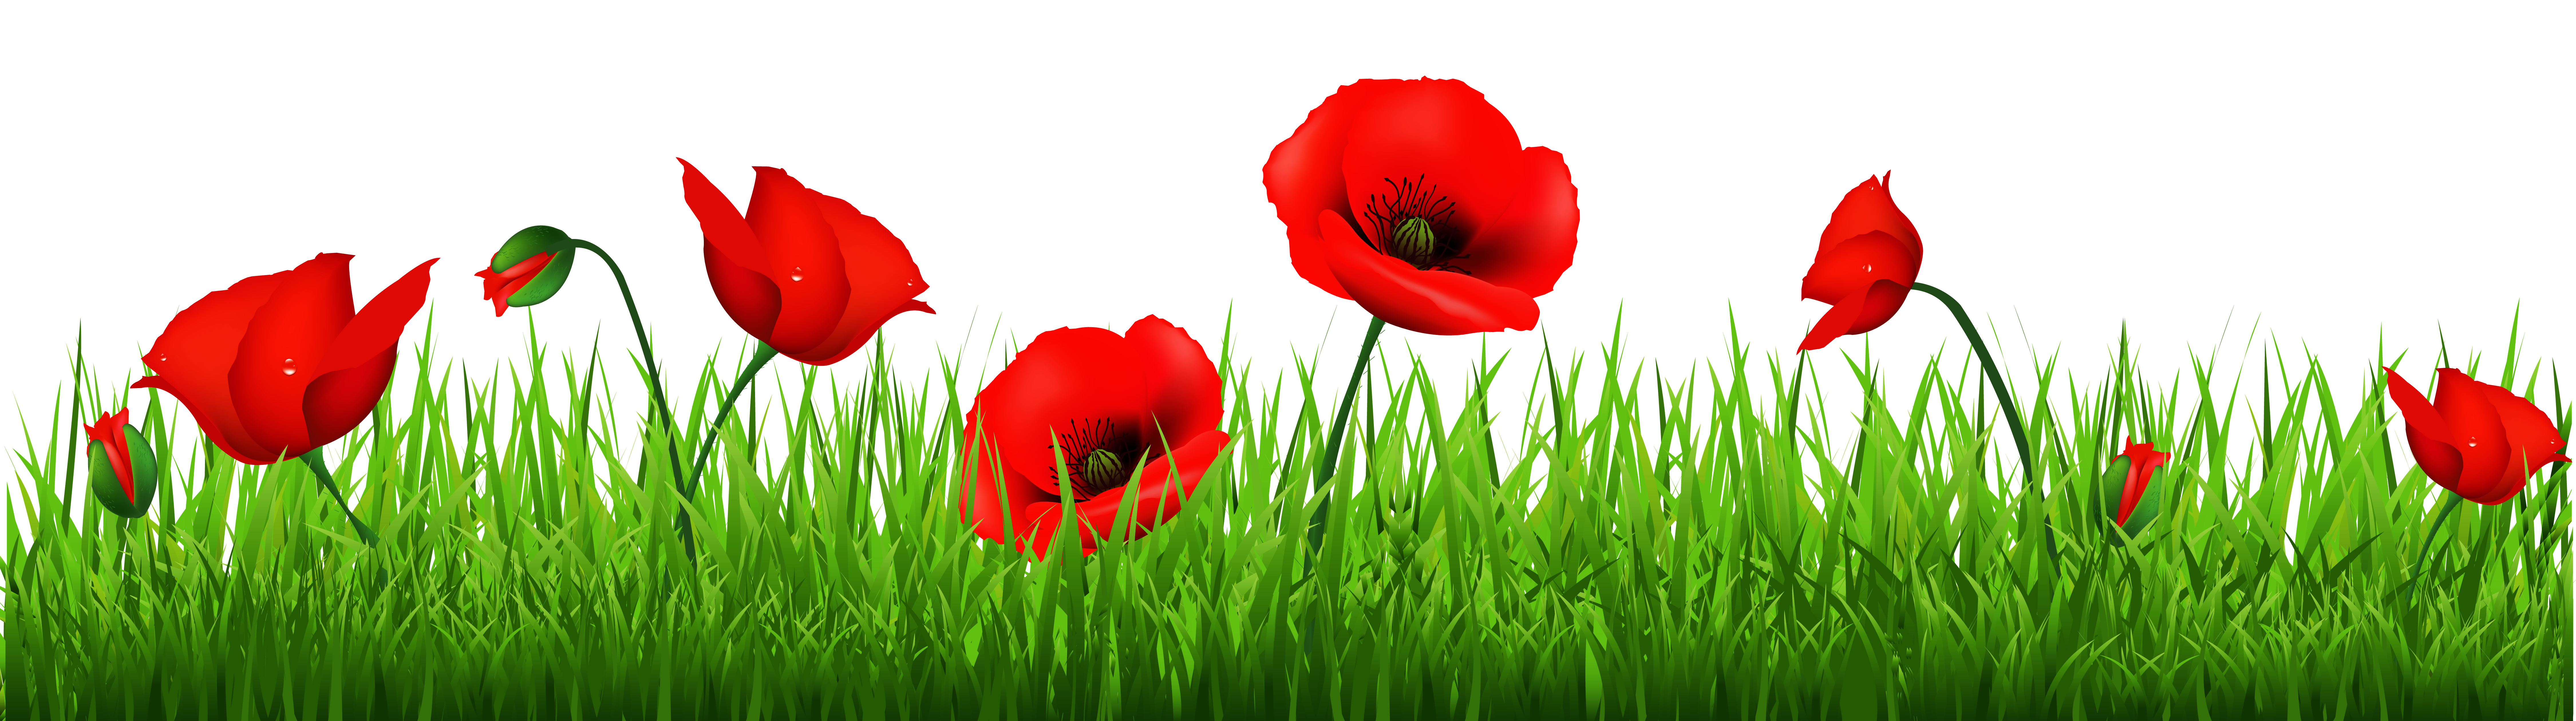 Remembrance Poppies Wallpaper